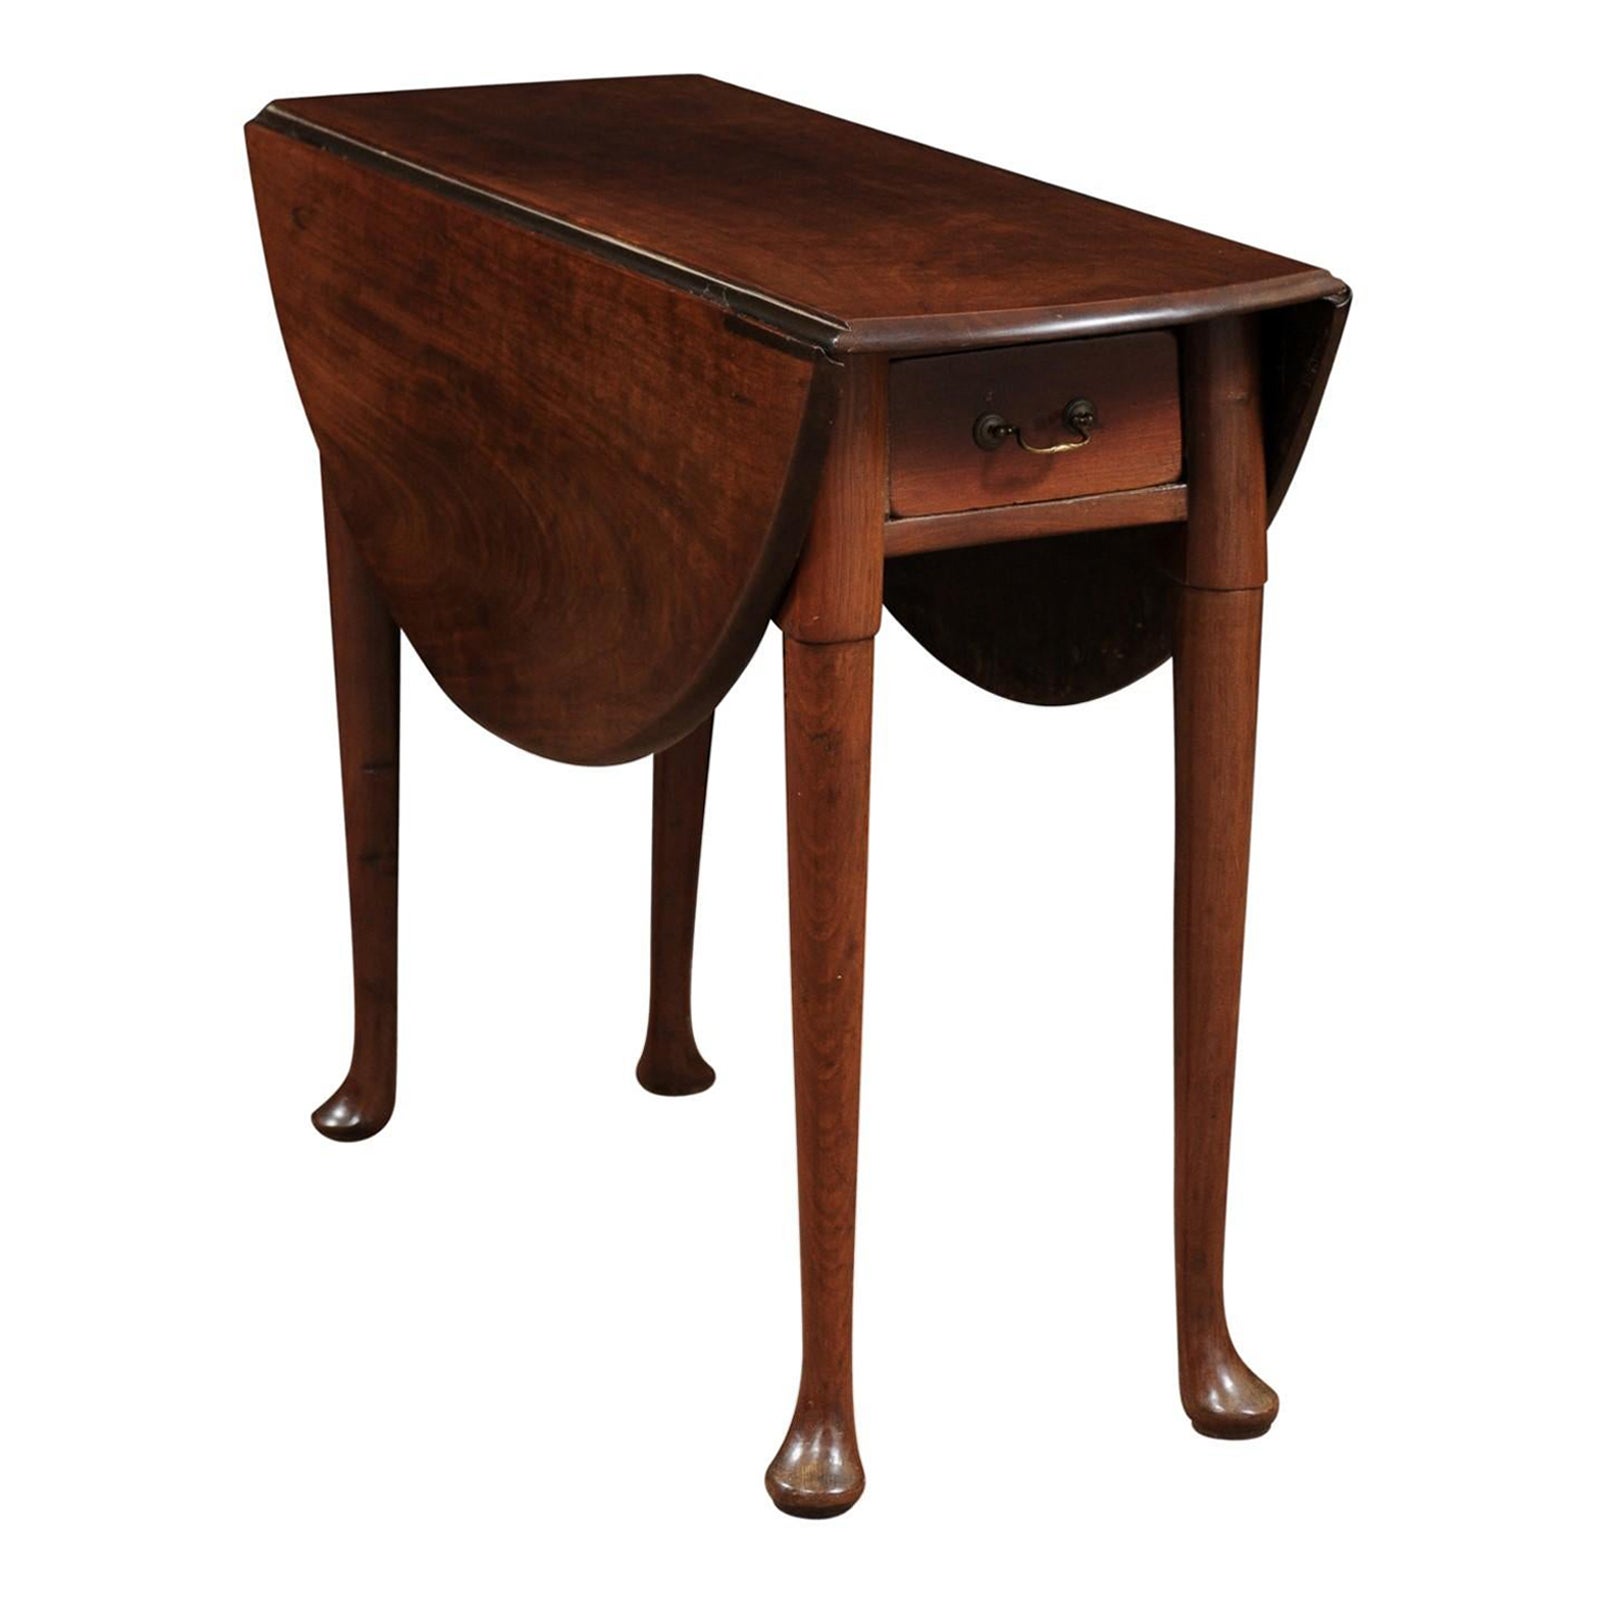 Queen Anne Drop Leaf Table in Walnut with Pad Feet For Sale